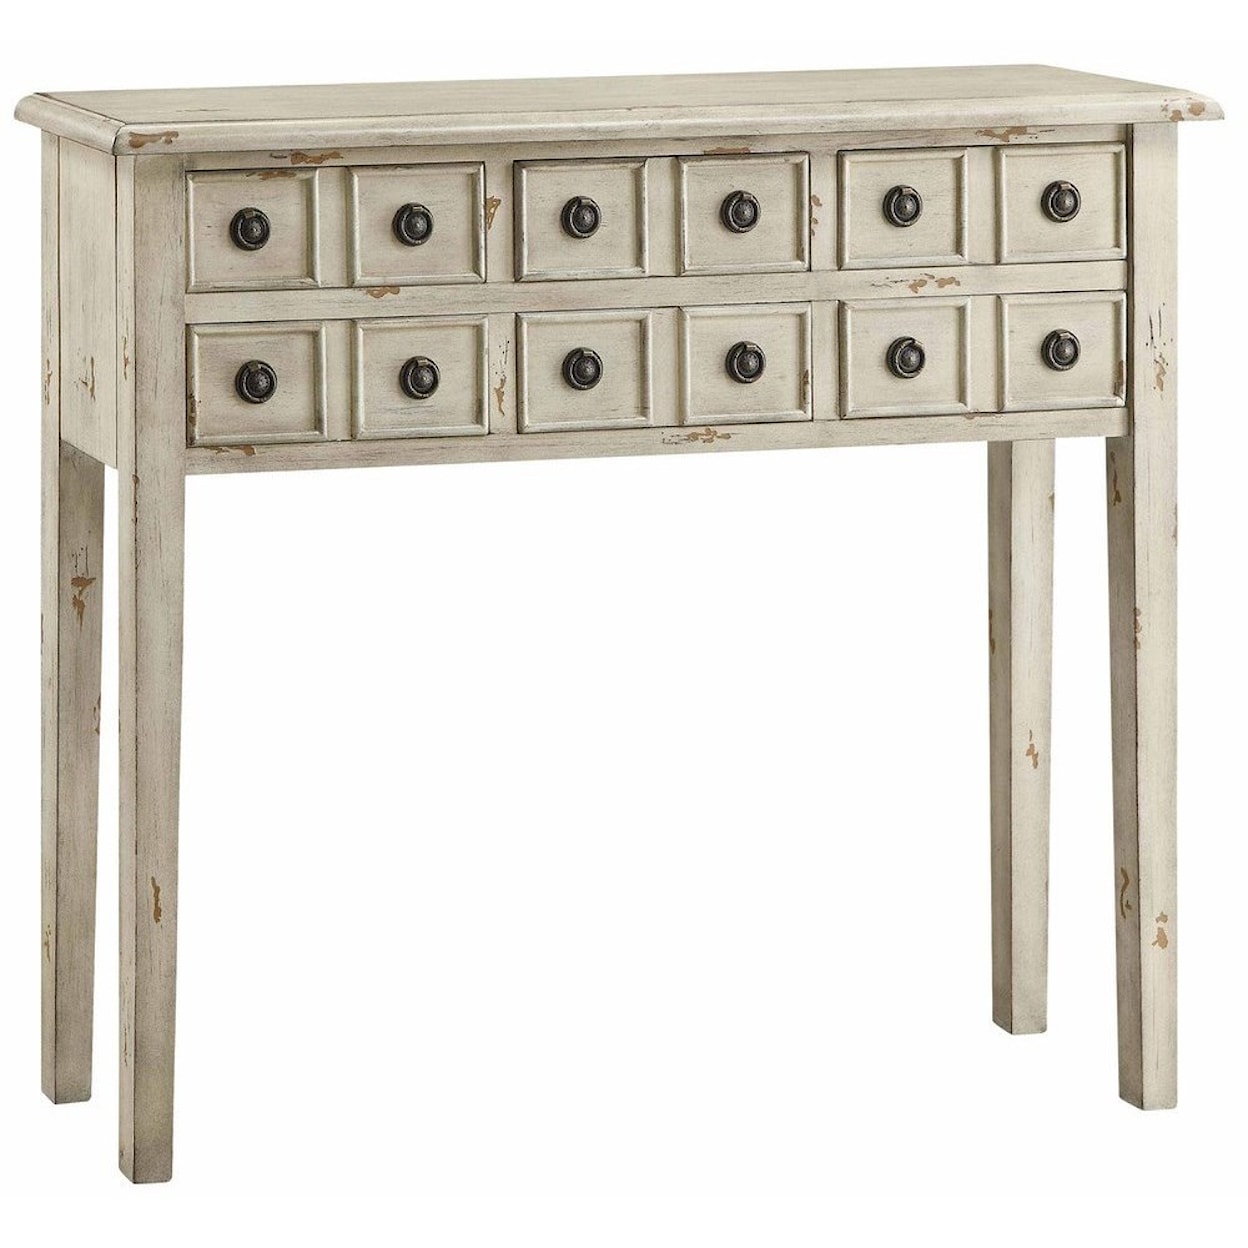 Crestview Collection Accent Furniture Newcastle 6 Drawer Antique White Console